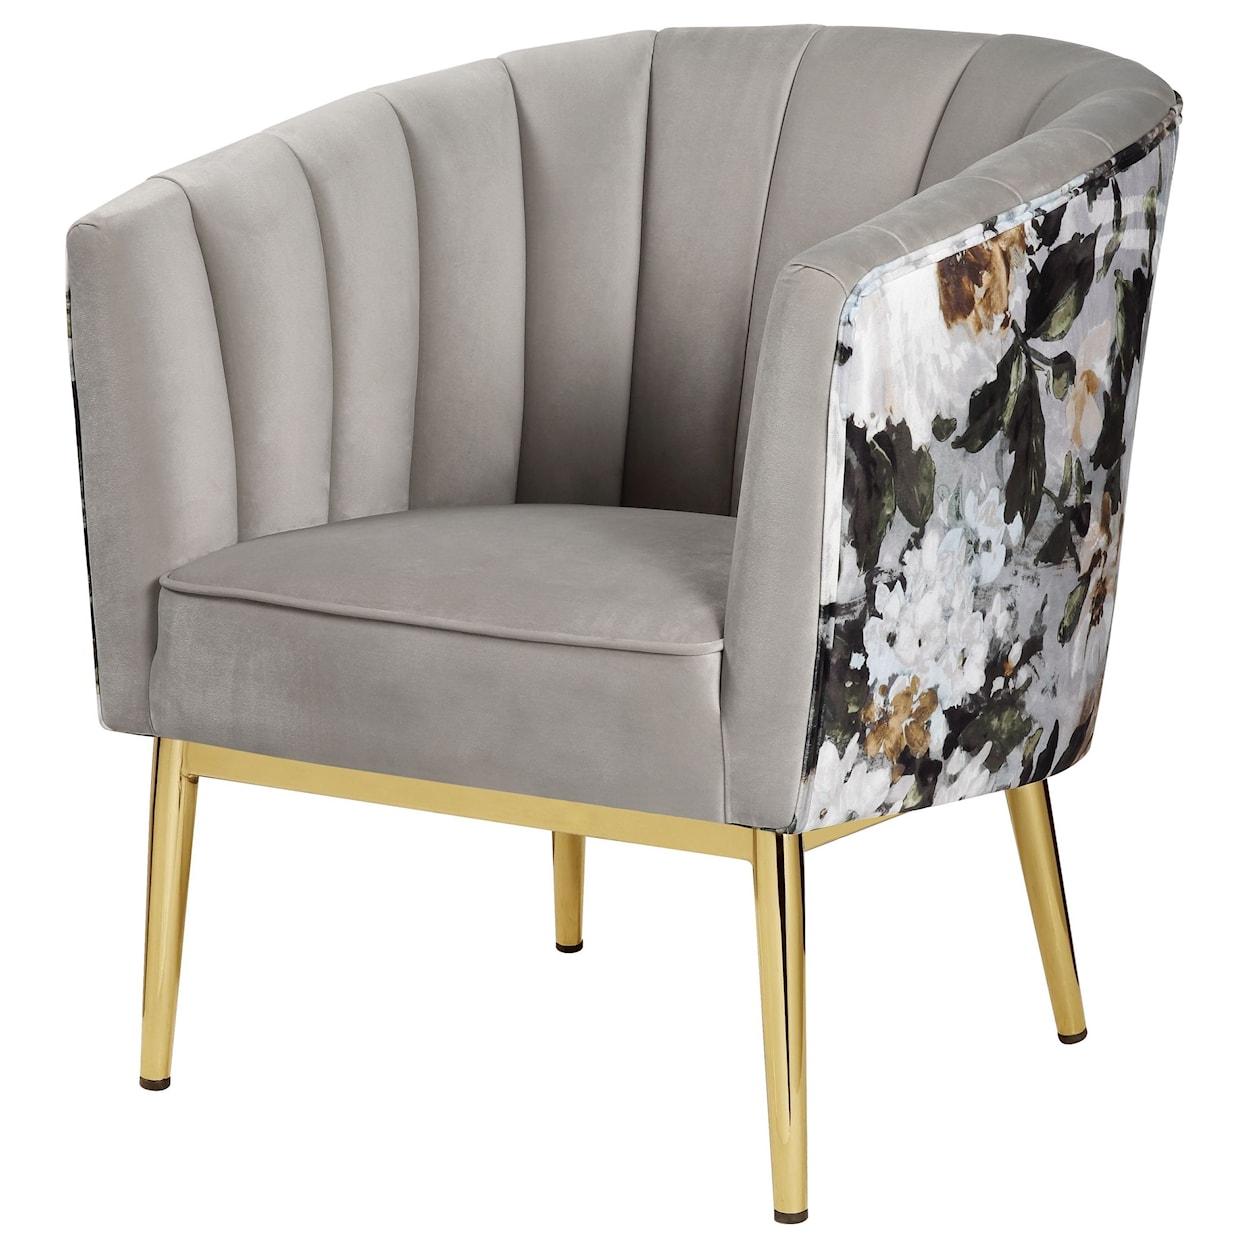 Acme Furniture Colla Accent Chair